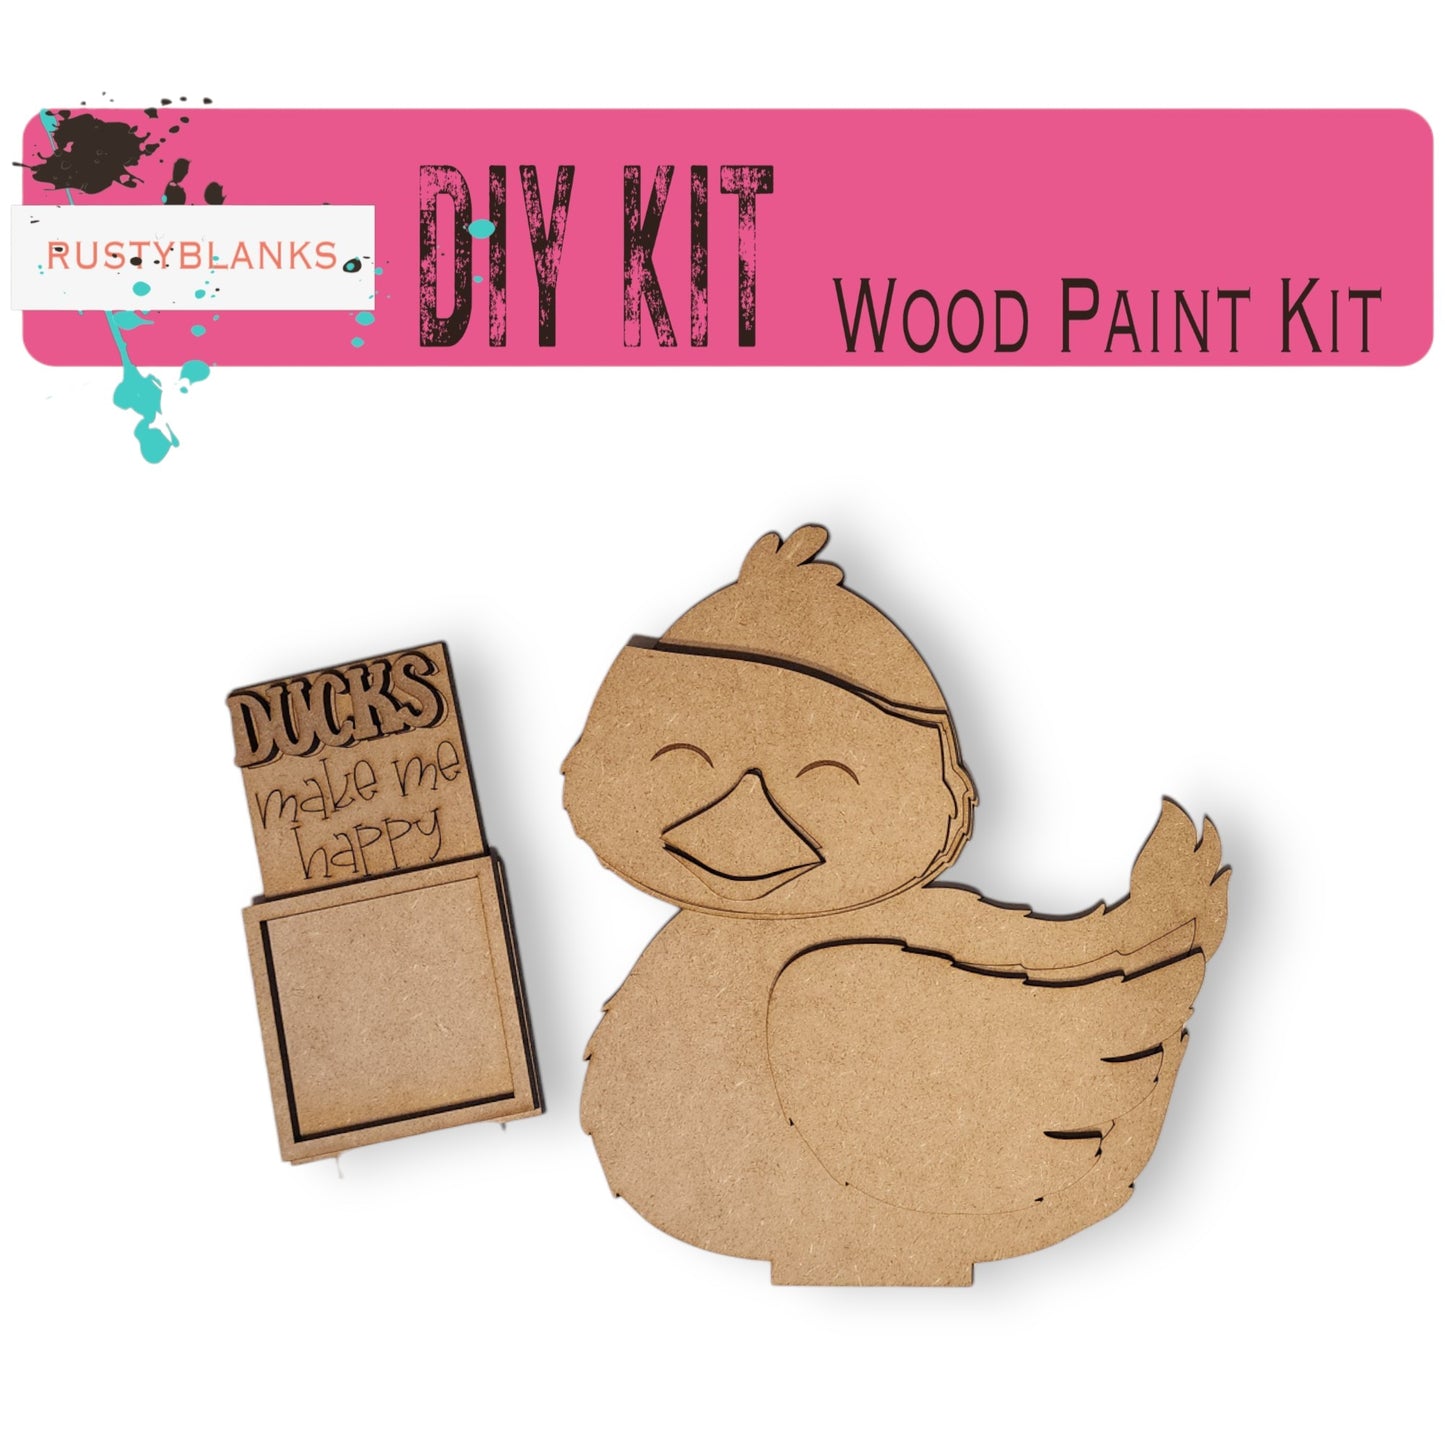 a picture of a wooden ducky painted kit